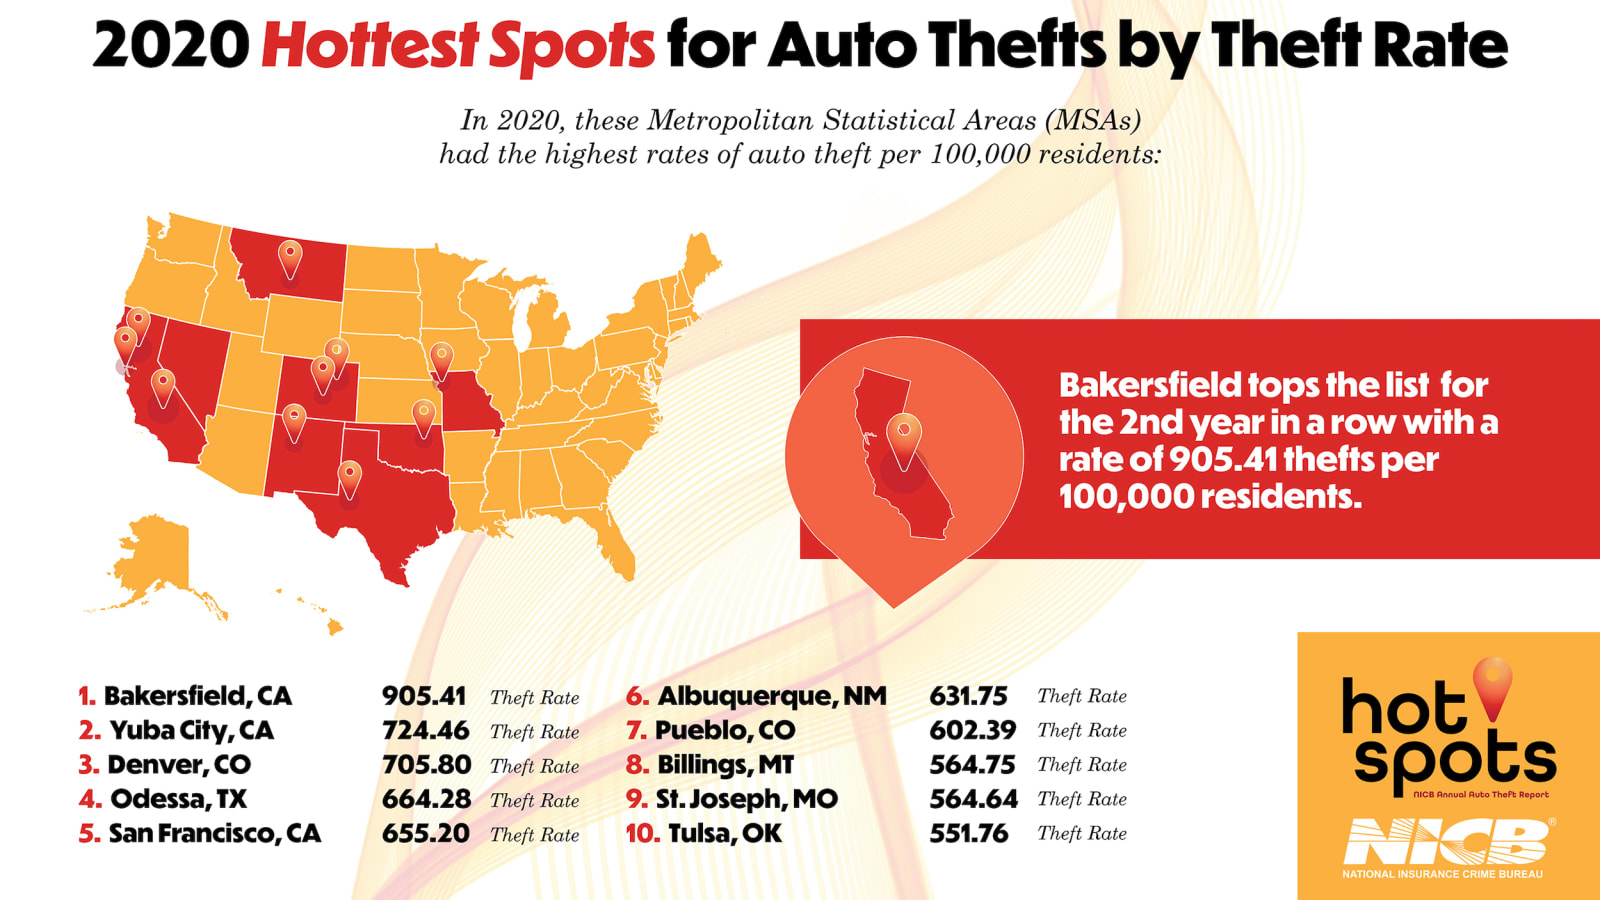 Vehicle thefts increased nearly 11% in 2020, in part due to the pandemic